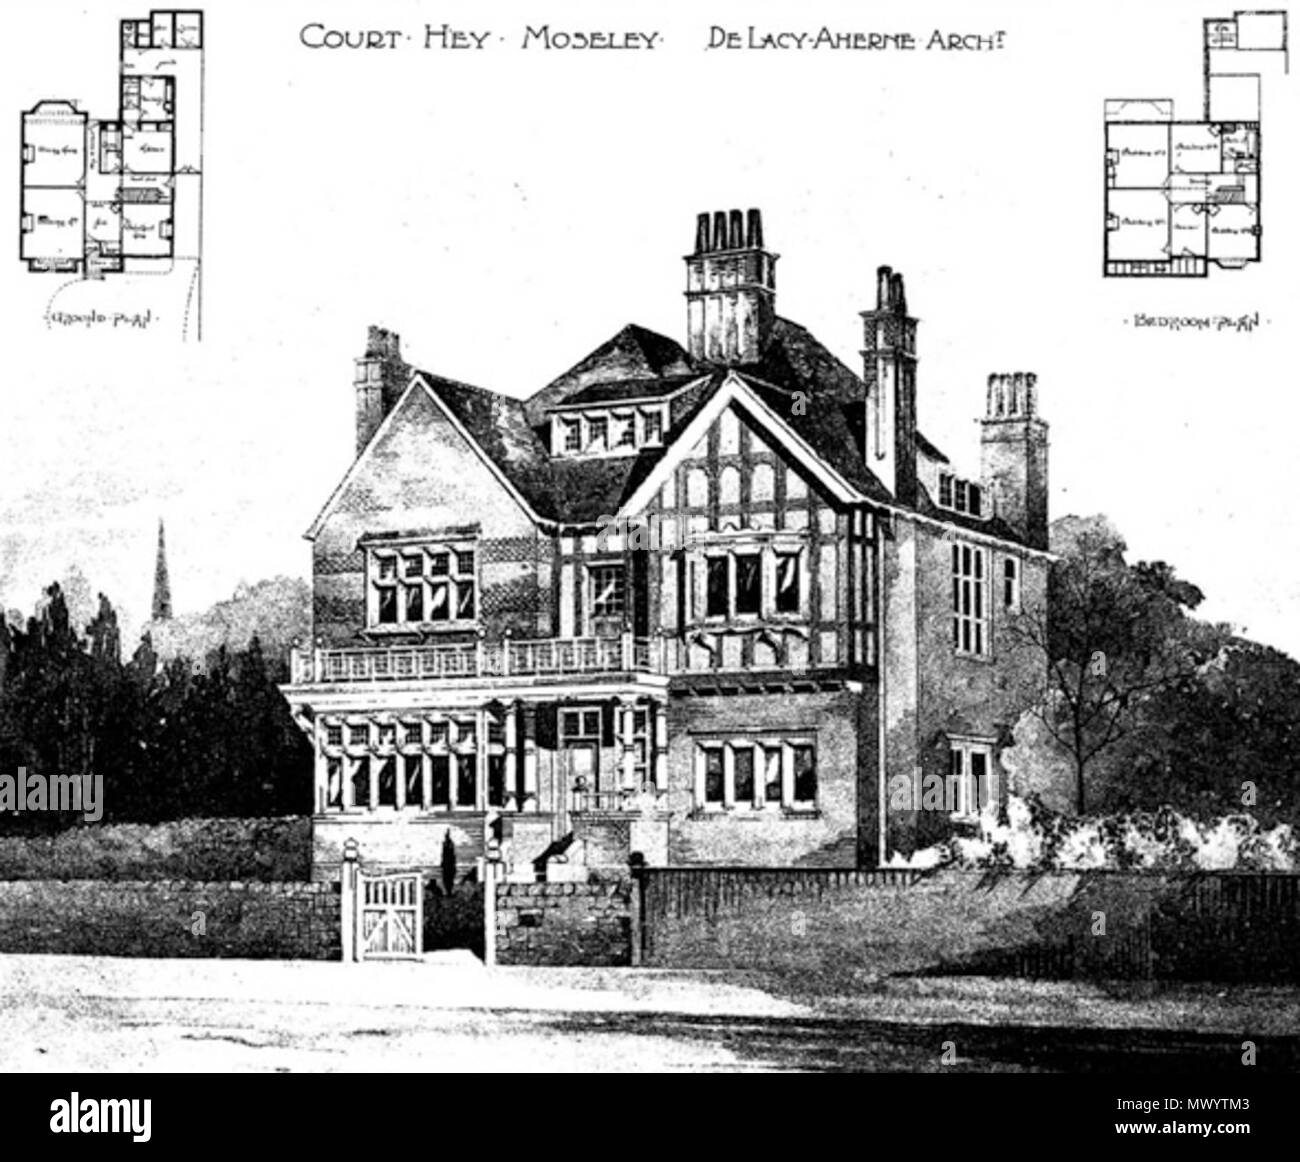 . English: Drawing of Court Hey in Moseley, Birmingham by William de Lacy Aherne, published in The Building News, April 8th 1880 . 20 September 2010, 14:51:26. William de Lacy Aherne 146 Court Hey, Moseley - William De Lacy Aherne Stock Photo